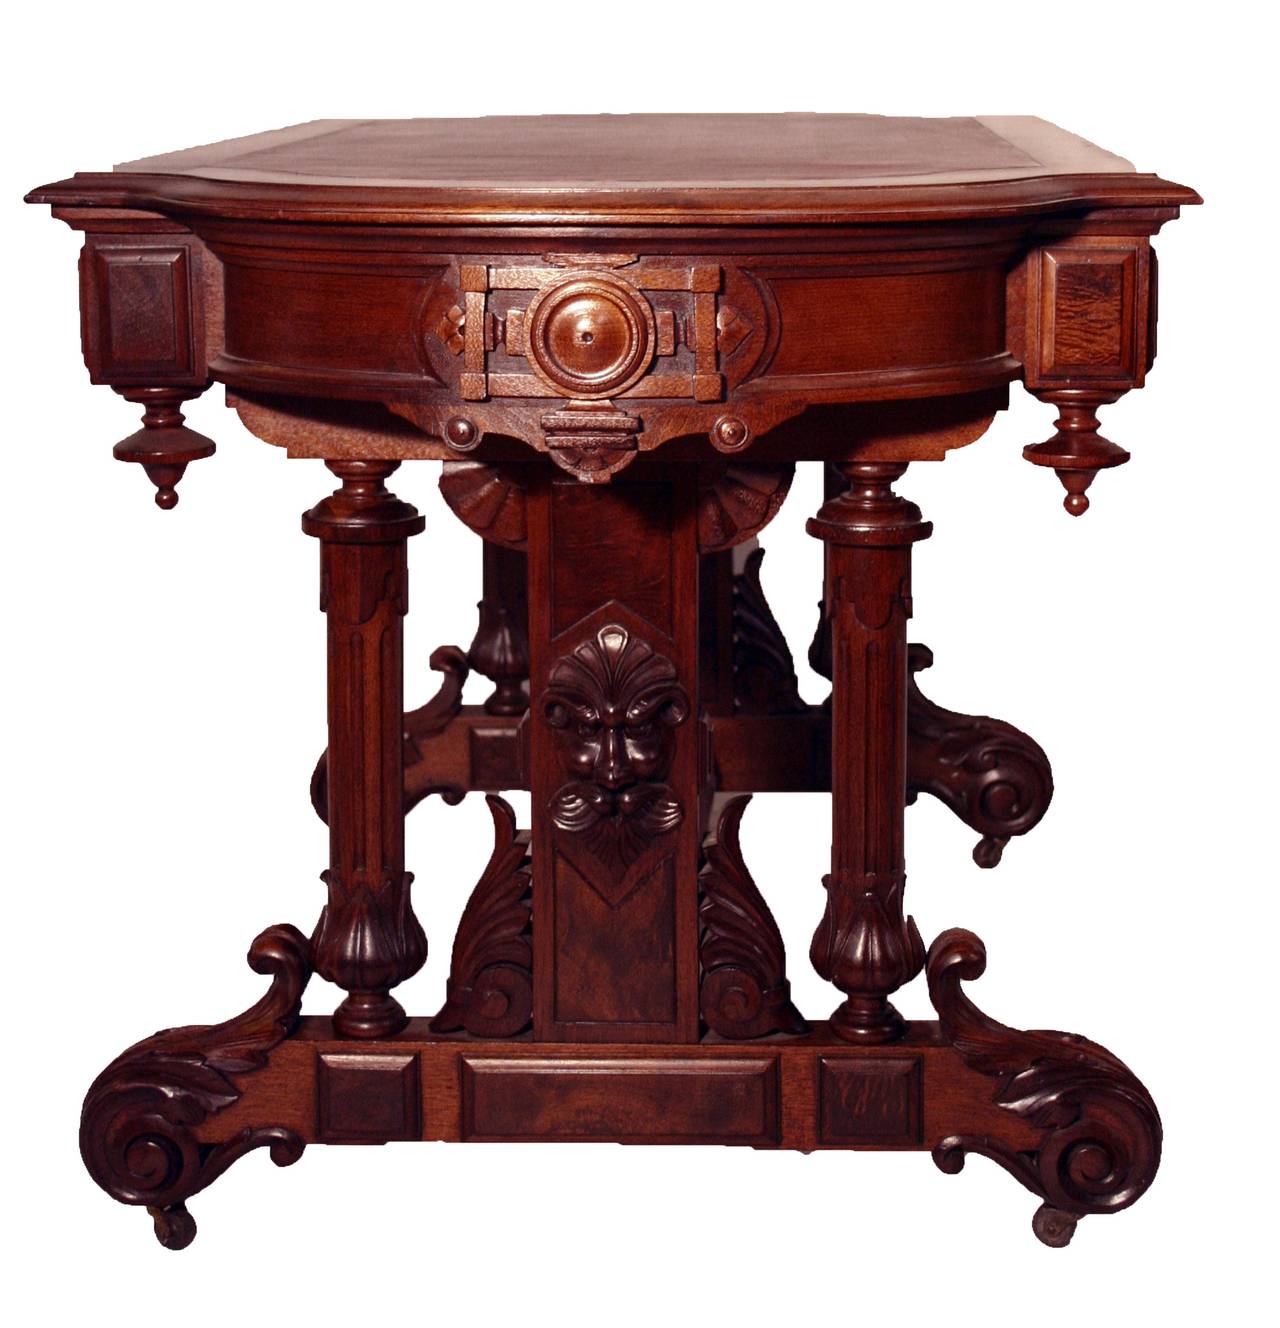 Leather 19th Century American Renaissance Revival Walnut Table and Desk